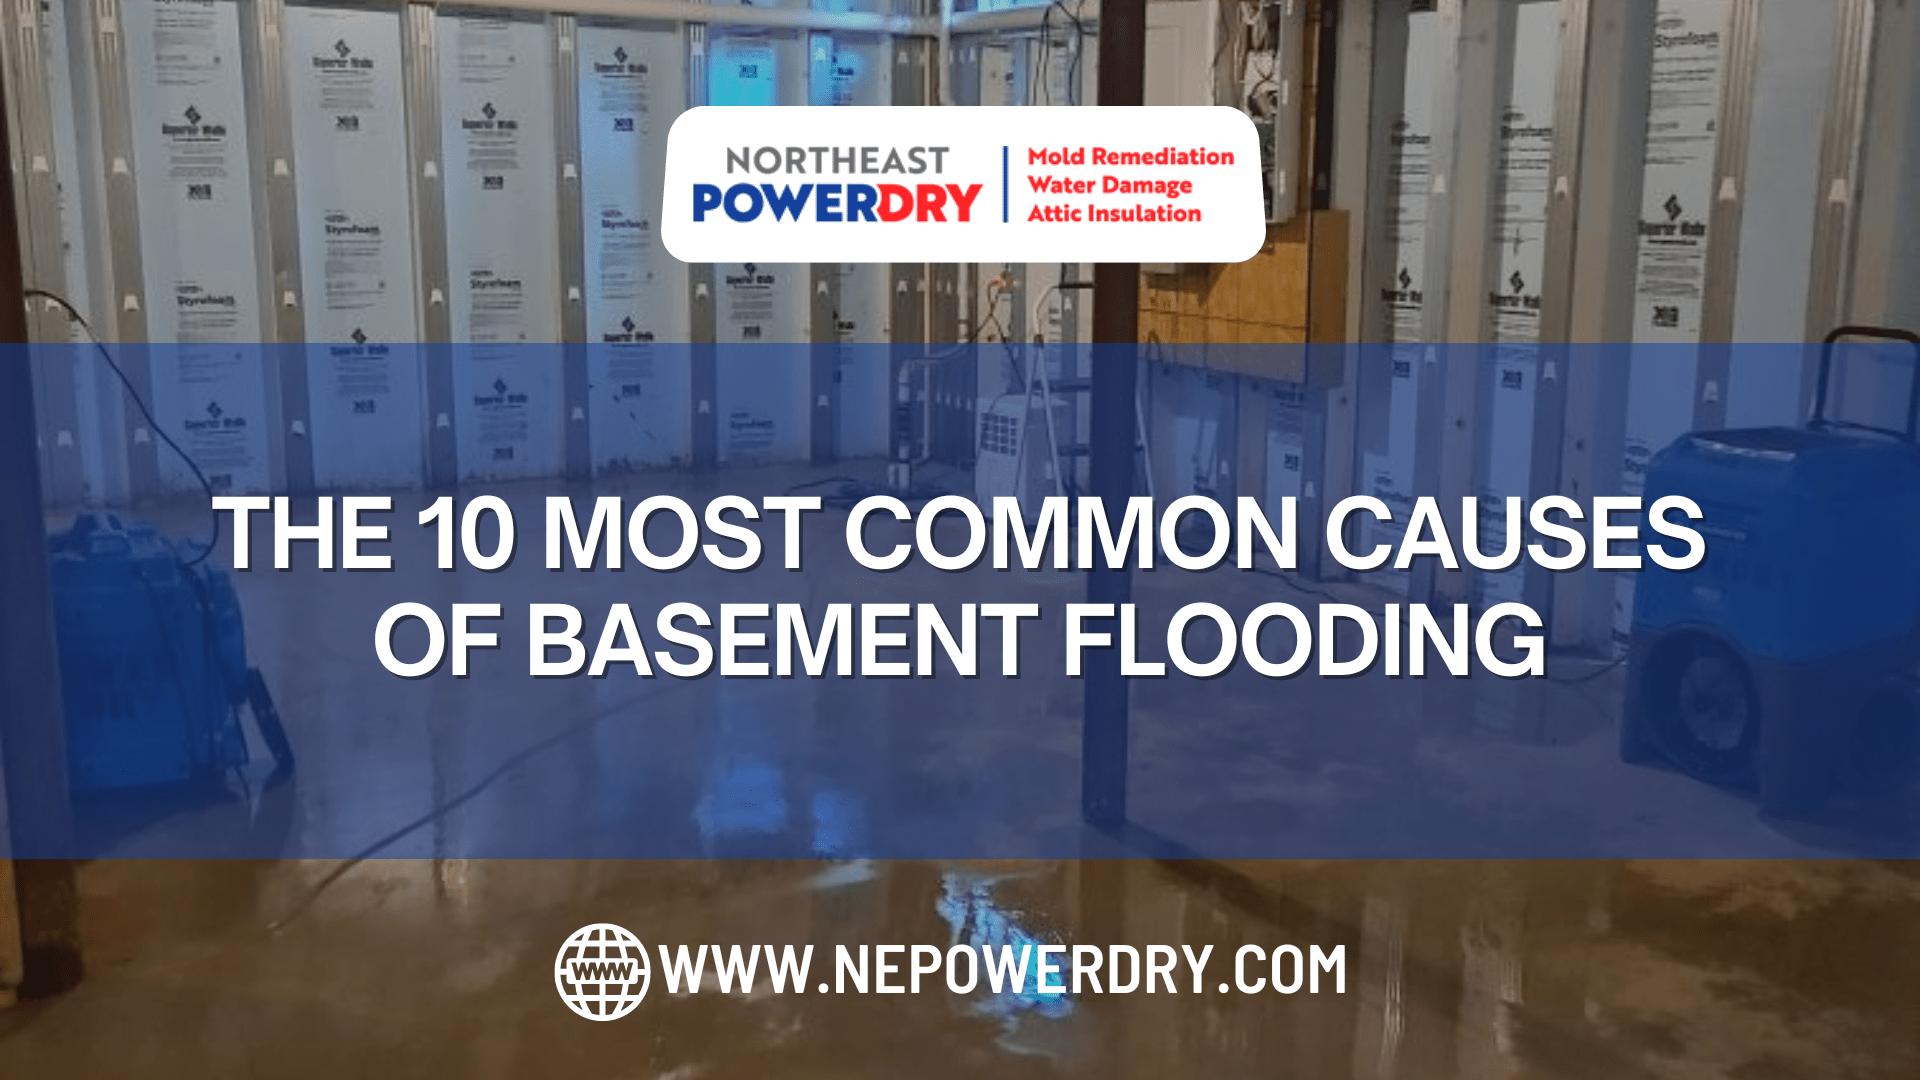 The 10 Most Common Causes of Basement Flooding